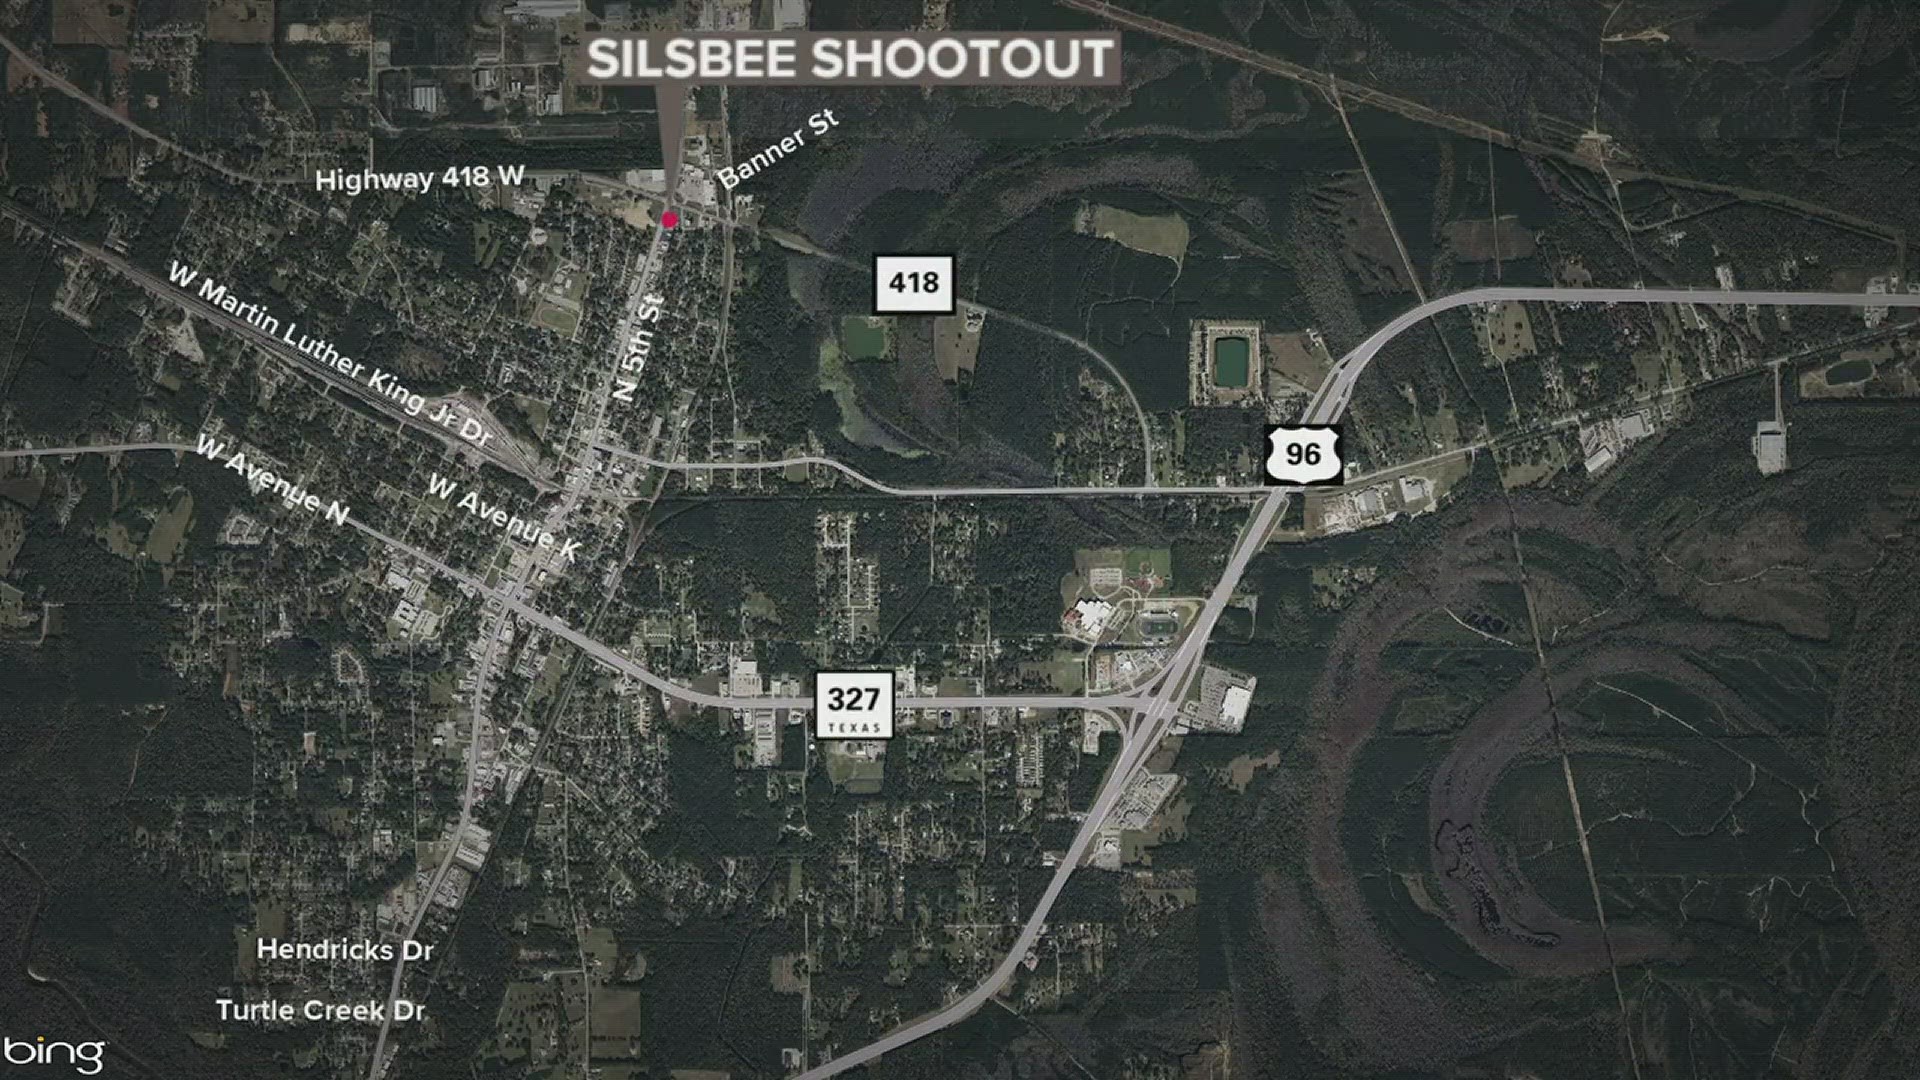 The shootout happened on the north end of the city less than a quarter mile north of the Silsbee Police station.